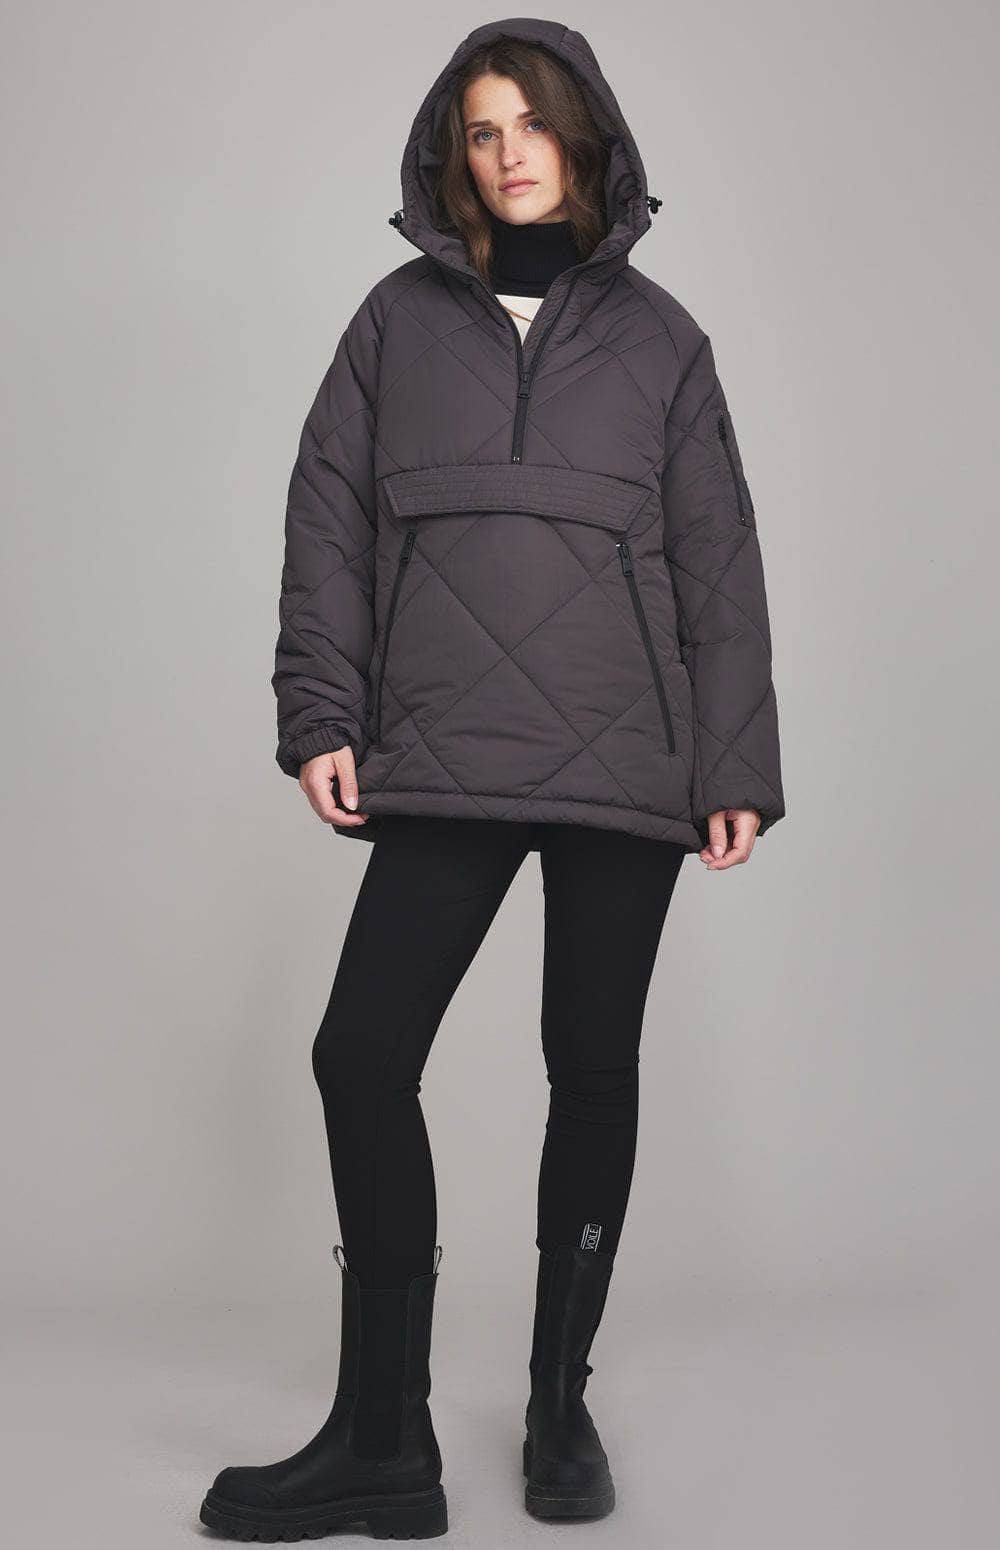 ANR Womens Jacket Yuki Quilted Pullover | Shale - Preloved